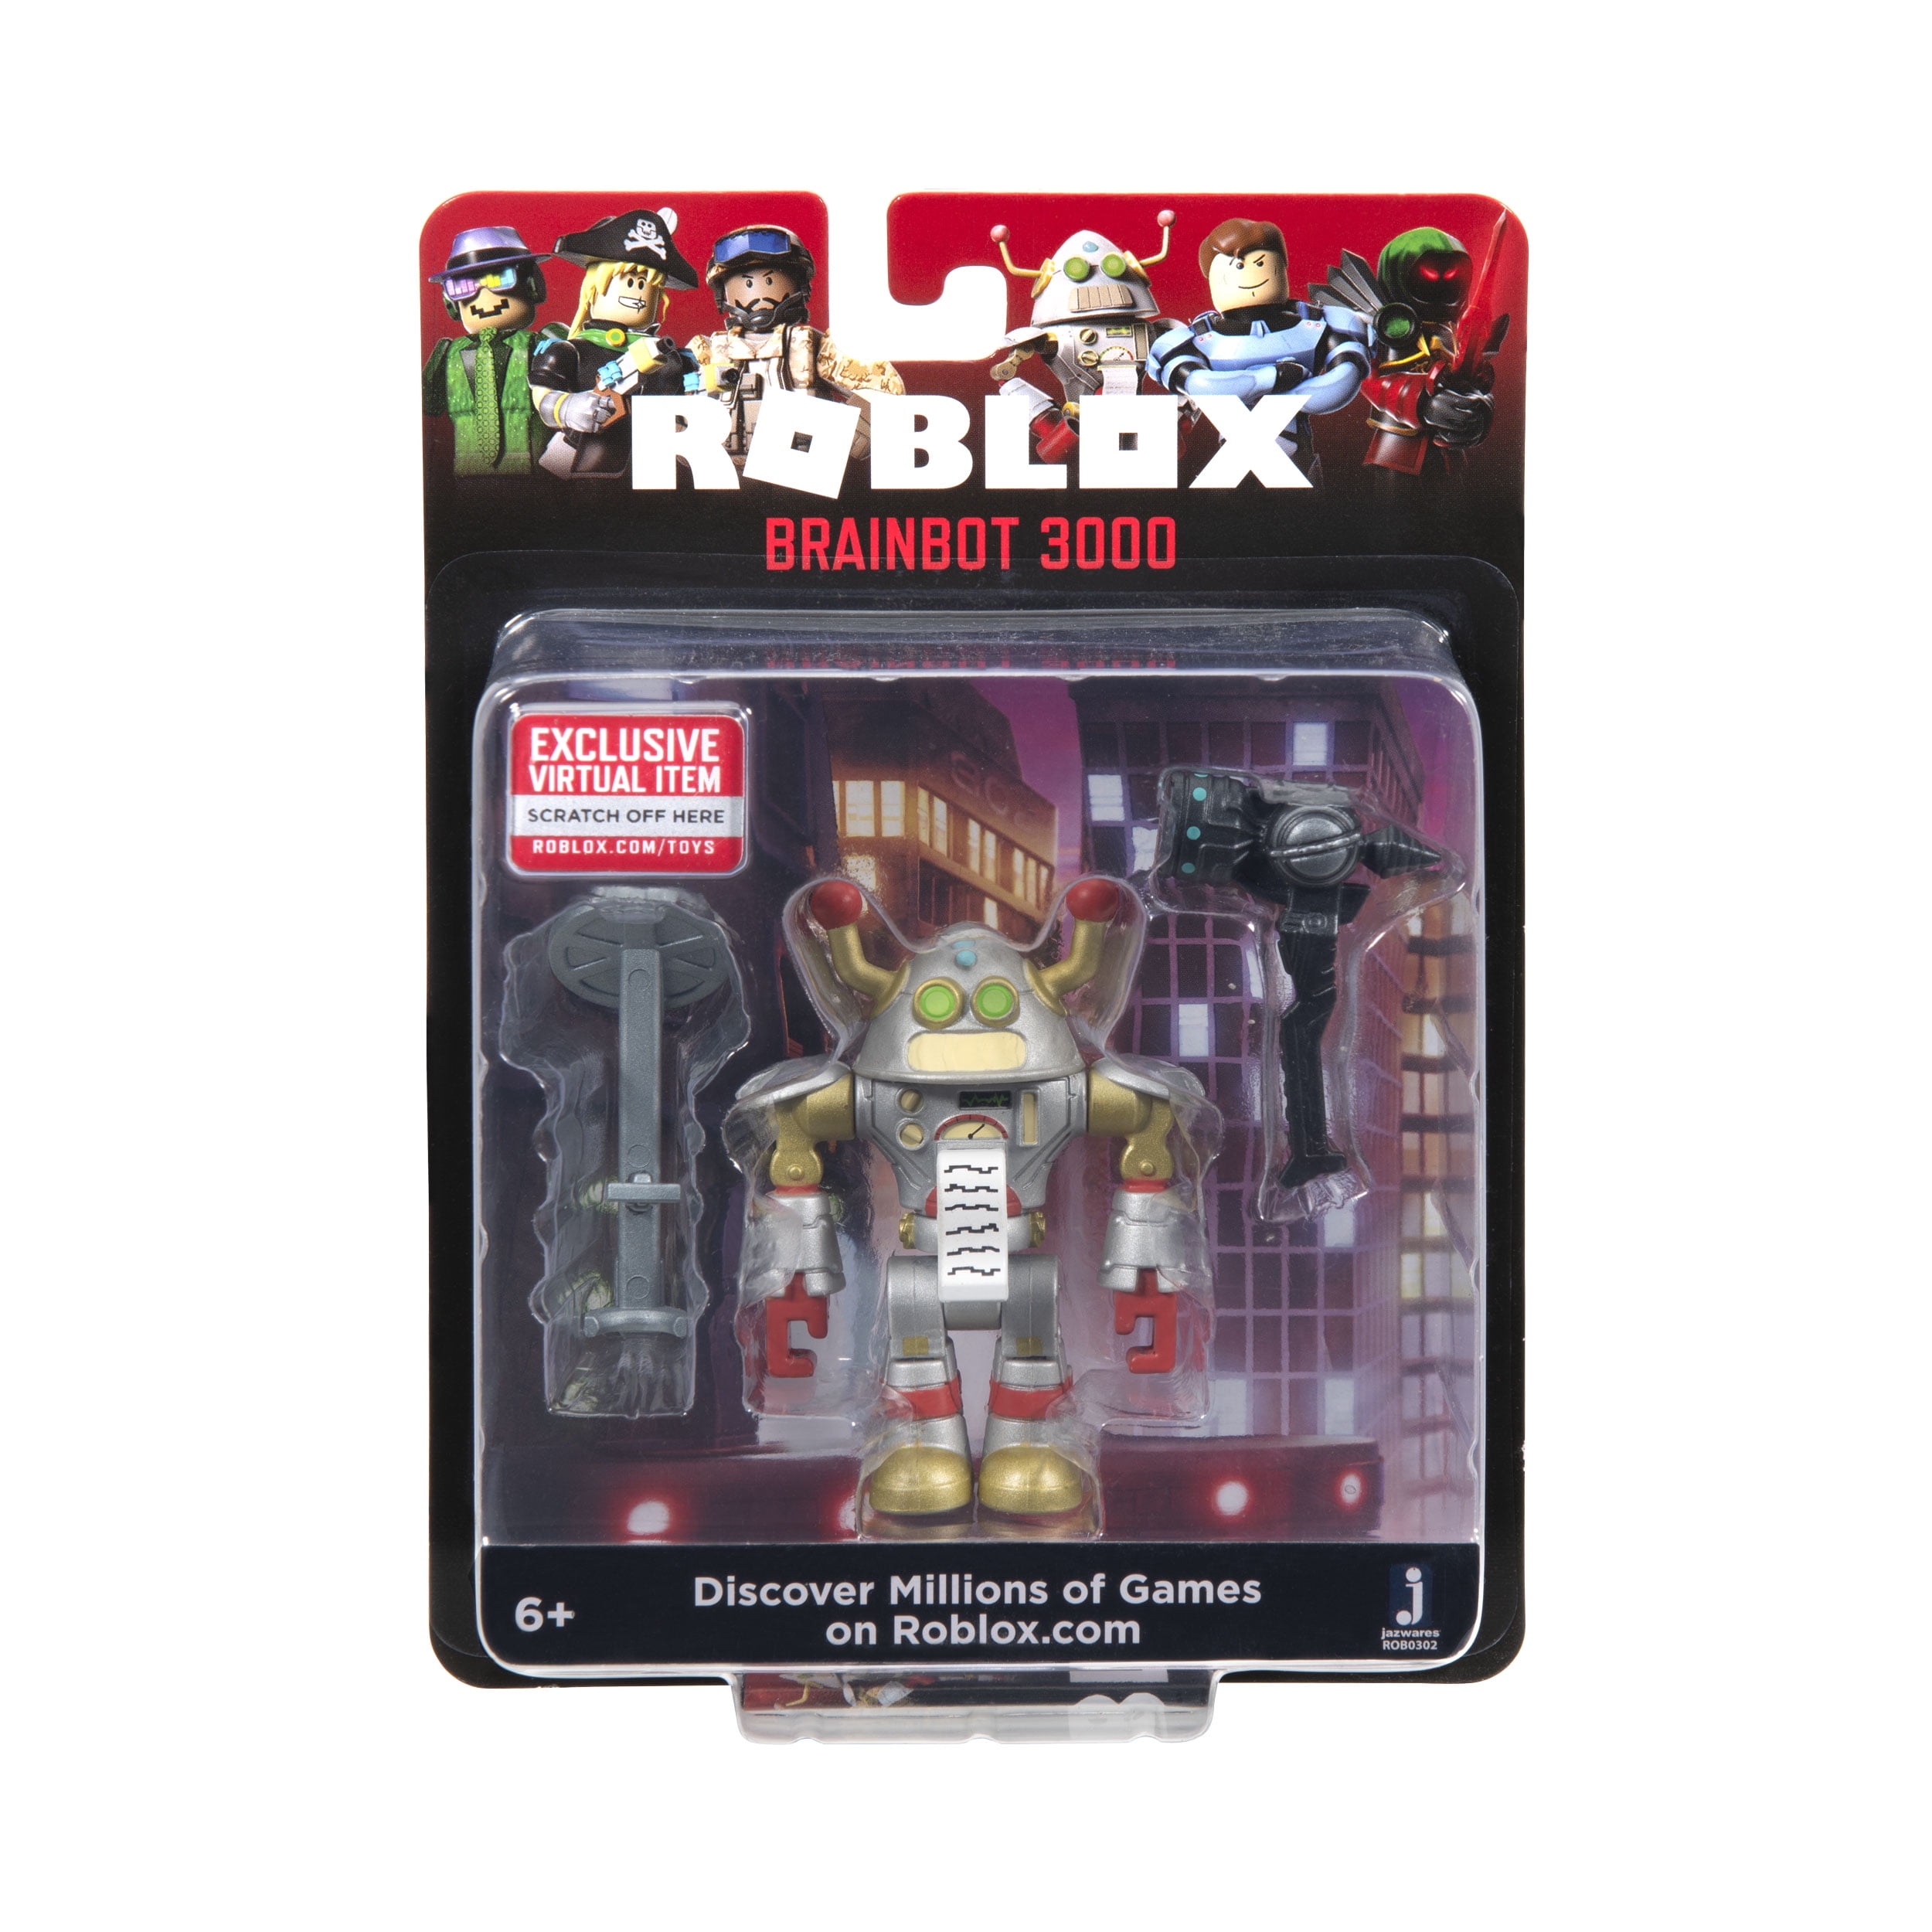 Roblox Action Collection 3 Inch 1 Figure Pack With Accessories Styles May Vary Includes Exclusive Virtual Item Walmart Com Walmart Com - mr robot roblox toy